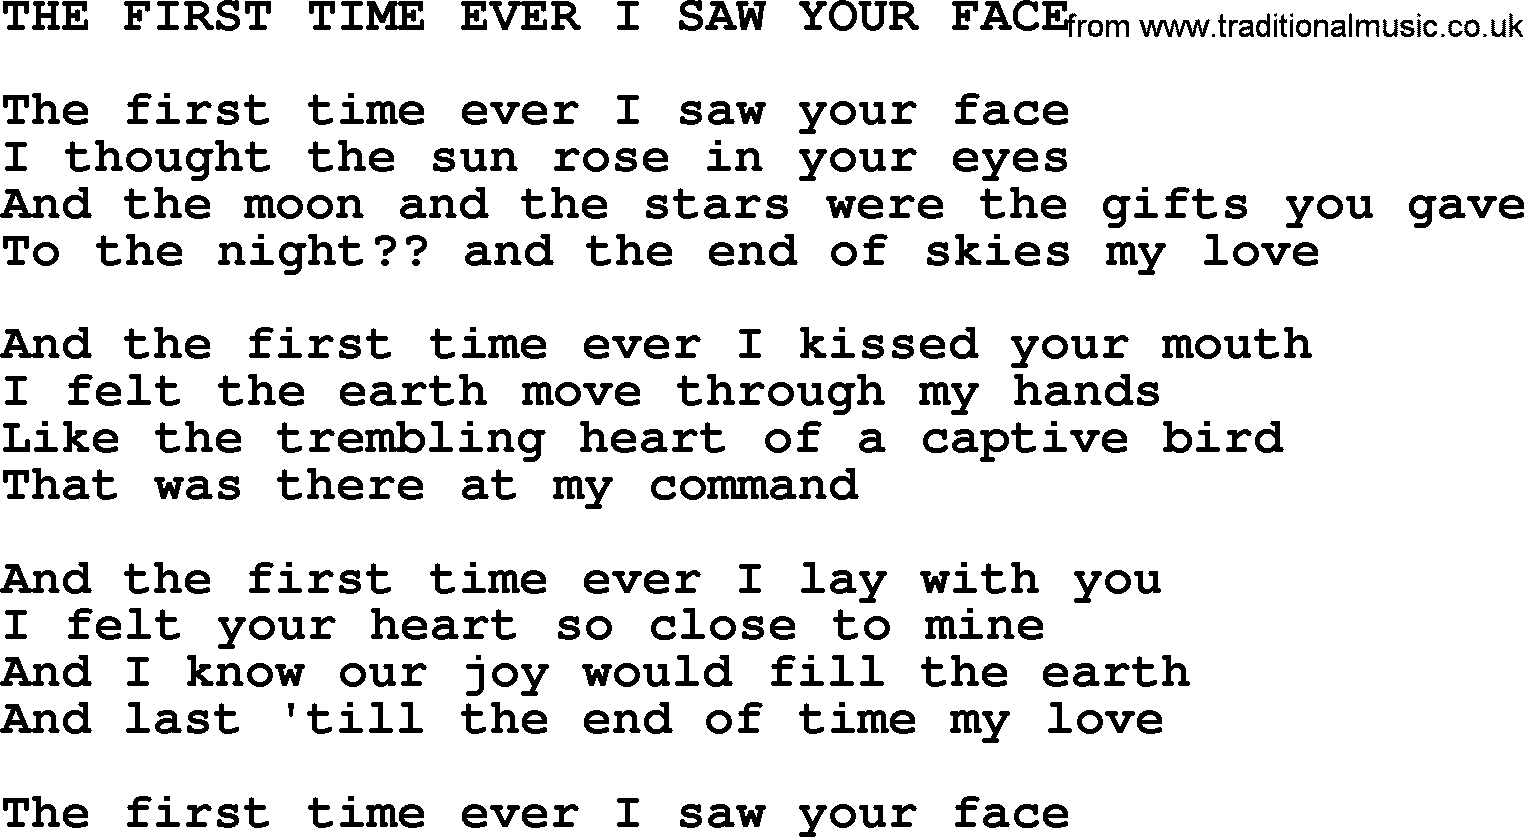 Johnny Cash song The First Time Ever I Saw Your Face.txt lyrics